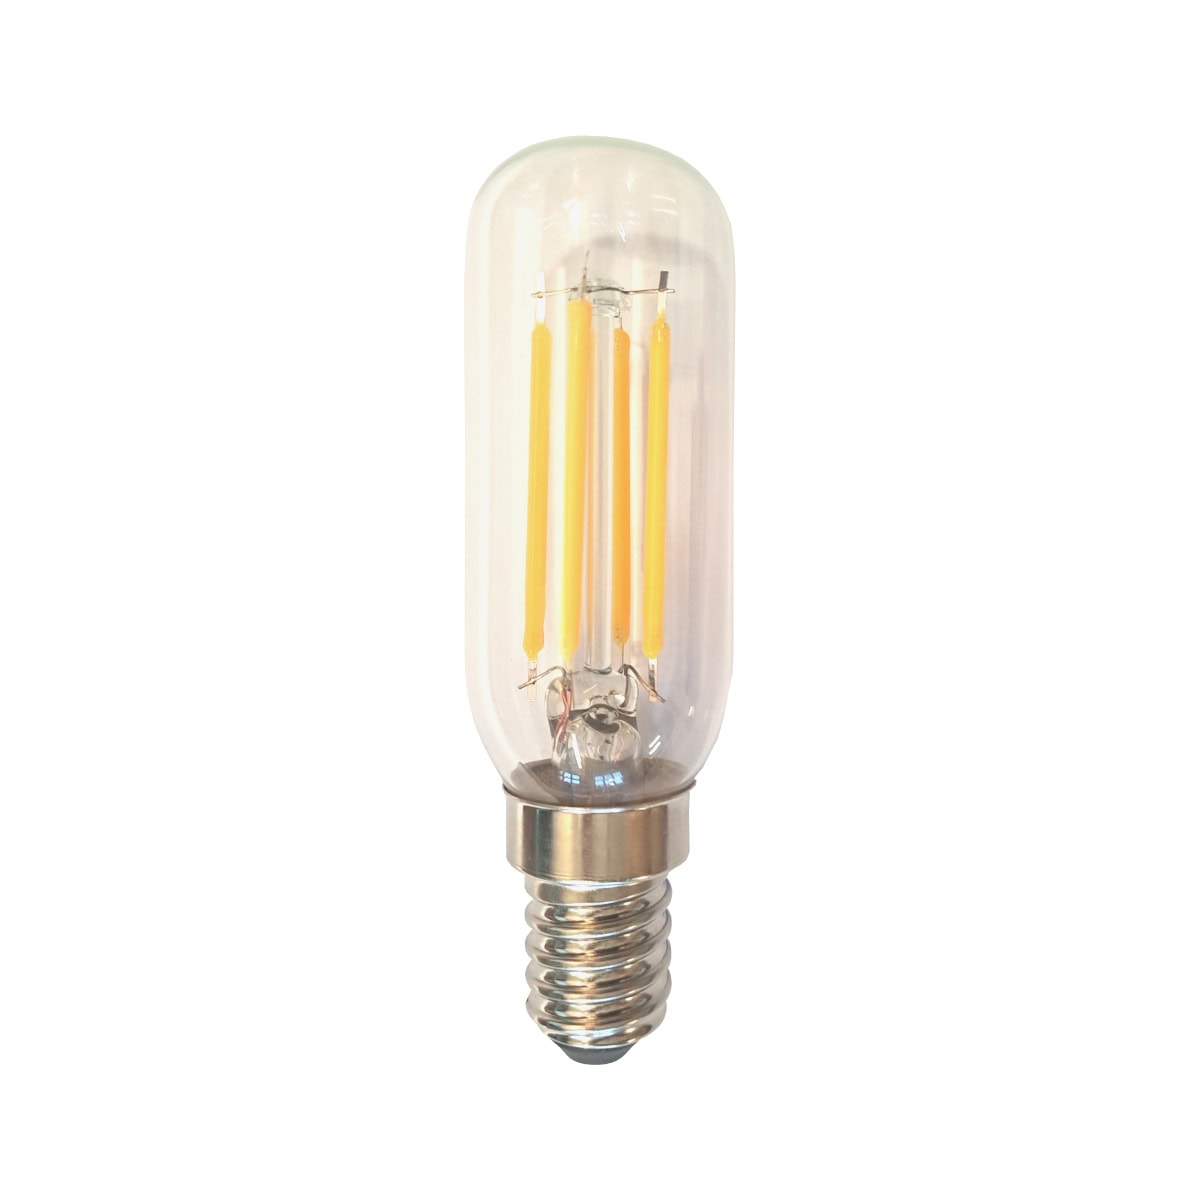 Product image of e14 t26 tubular led 4w lamp with clear glass